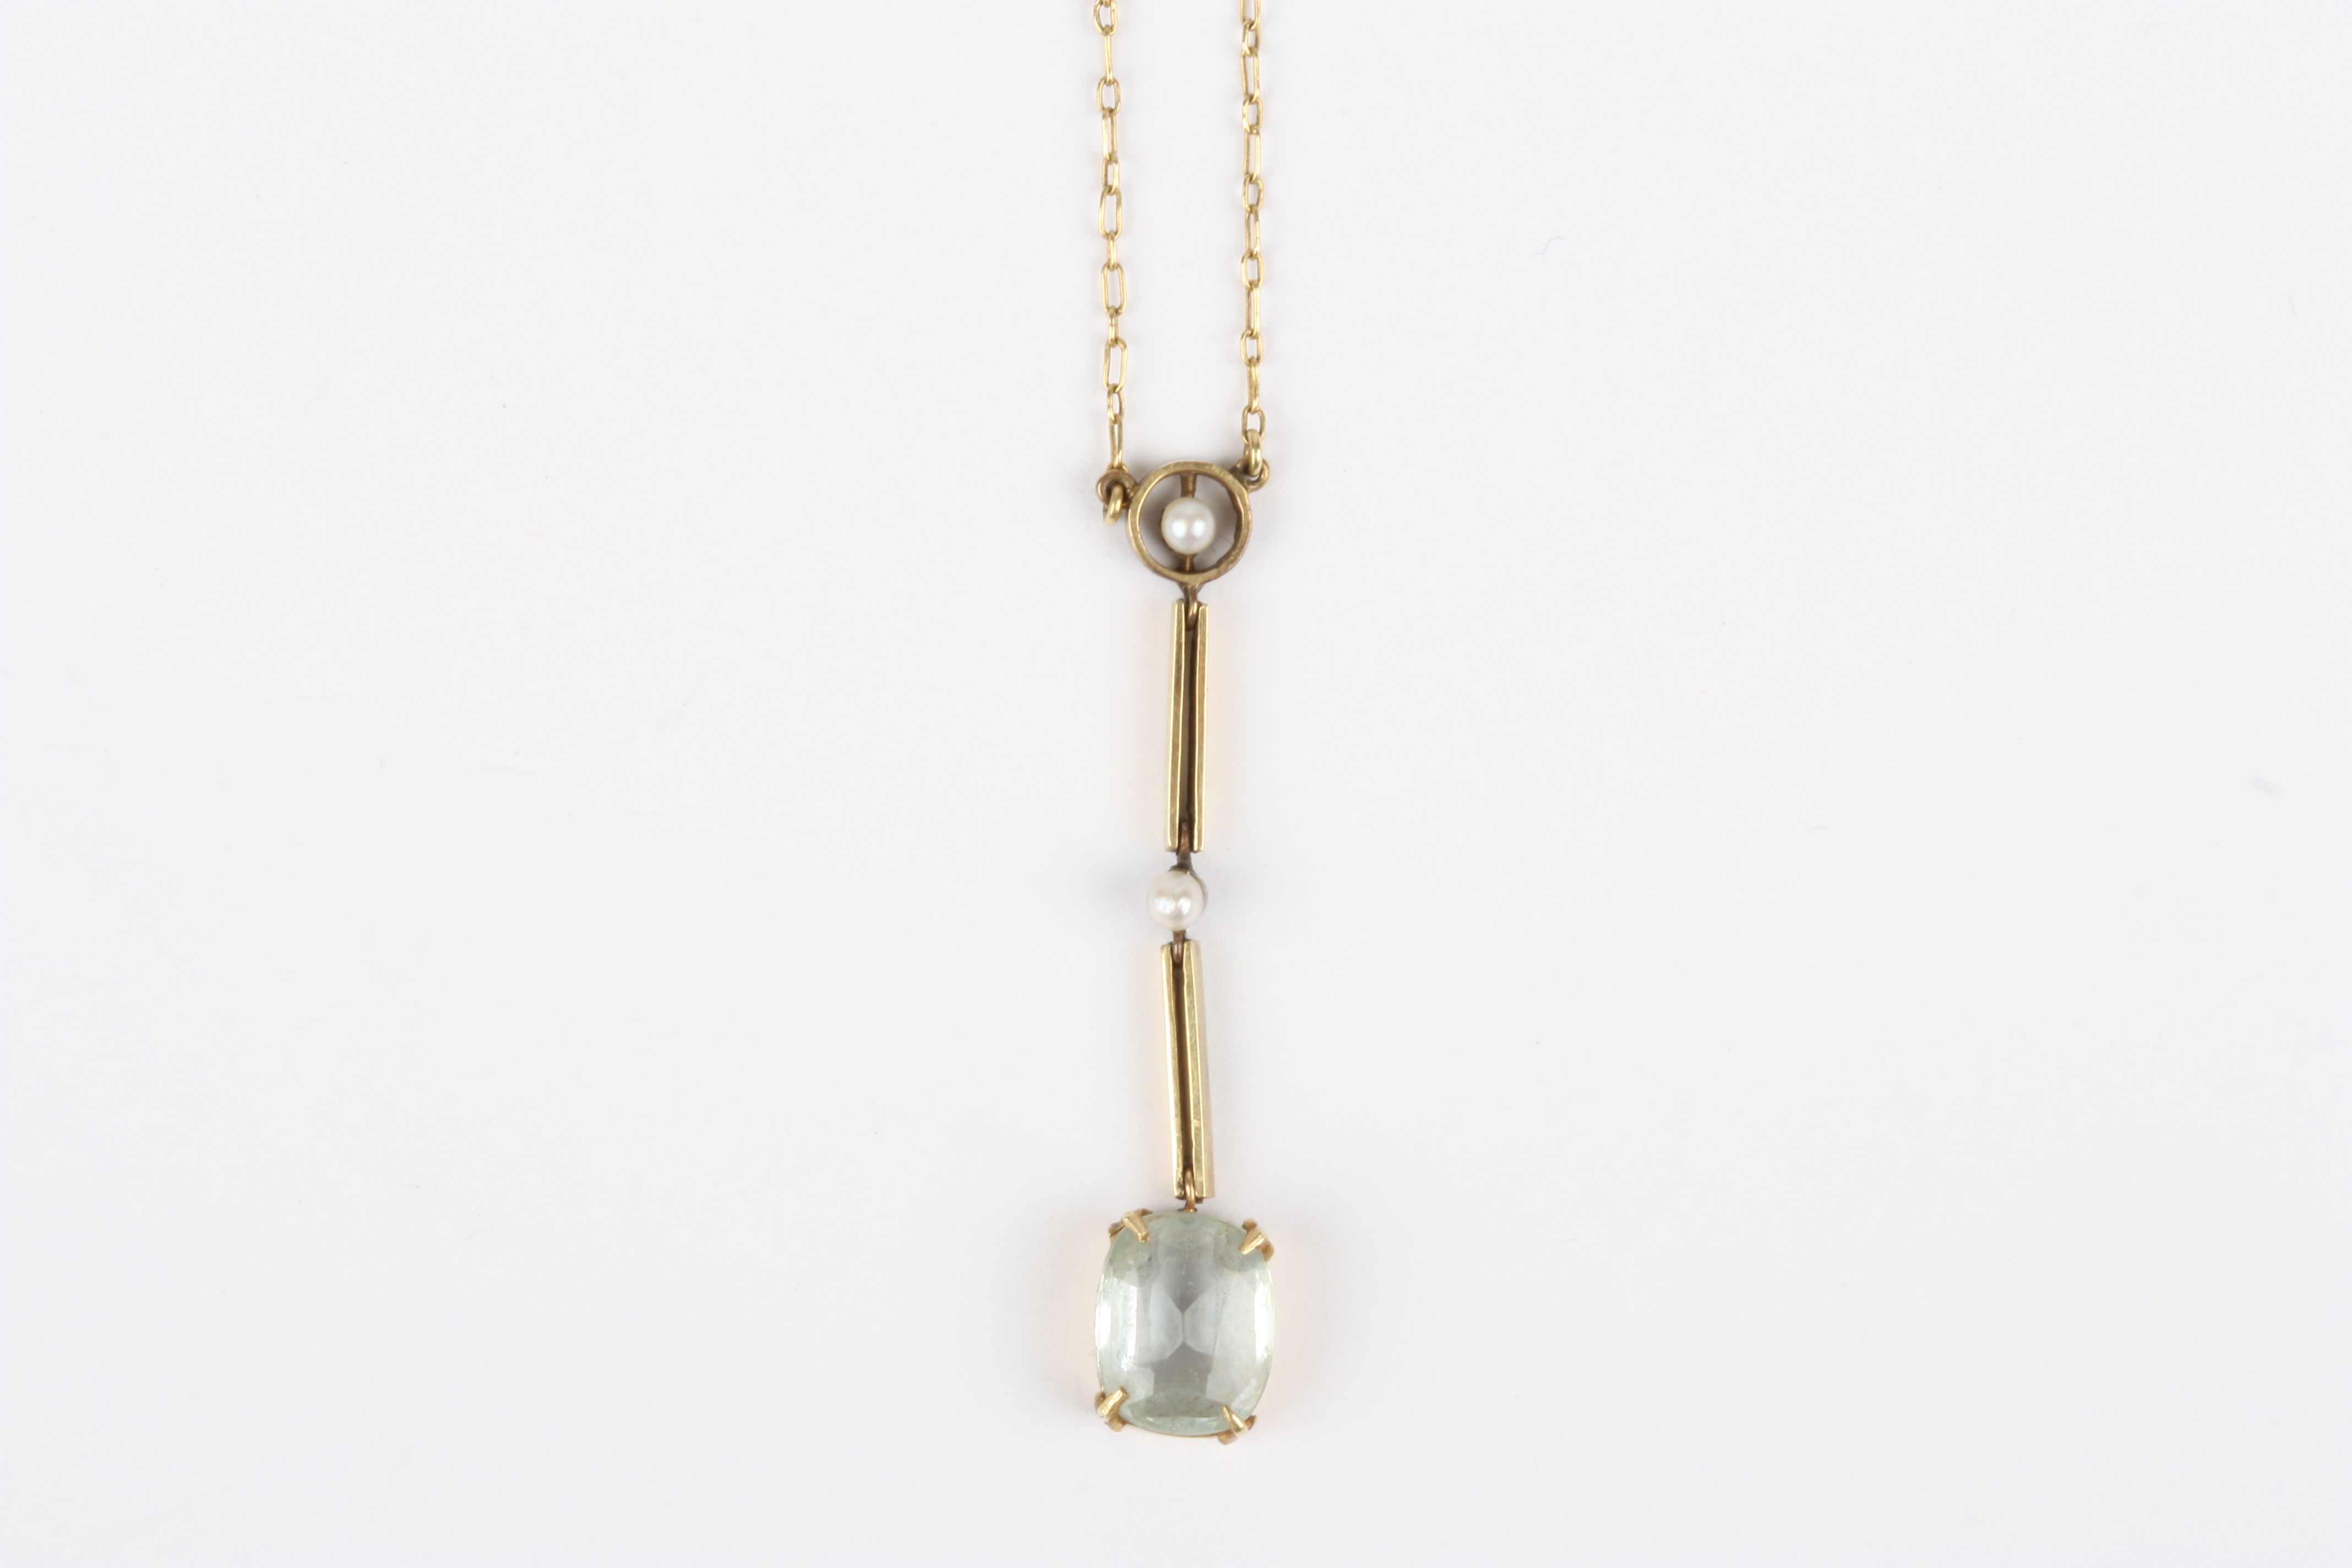 An Edwardian 15ct gold and aquamarine pendant, set with small seed pearls and large oval suspended